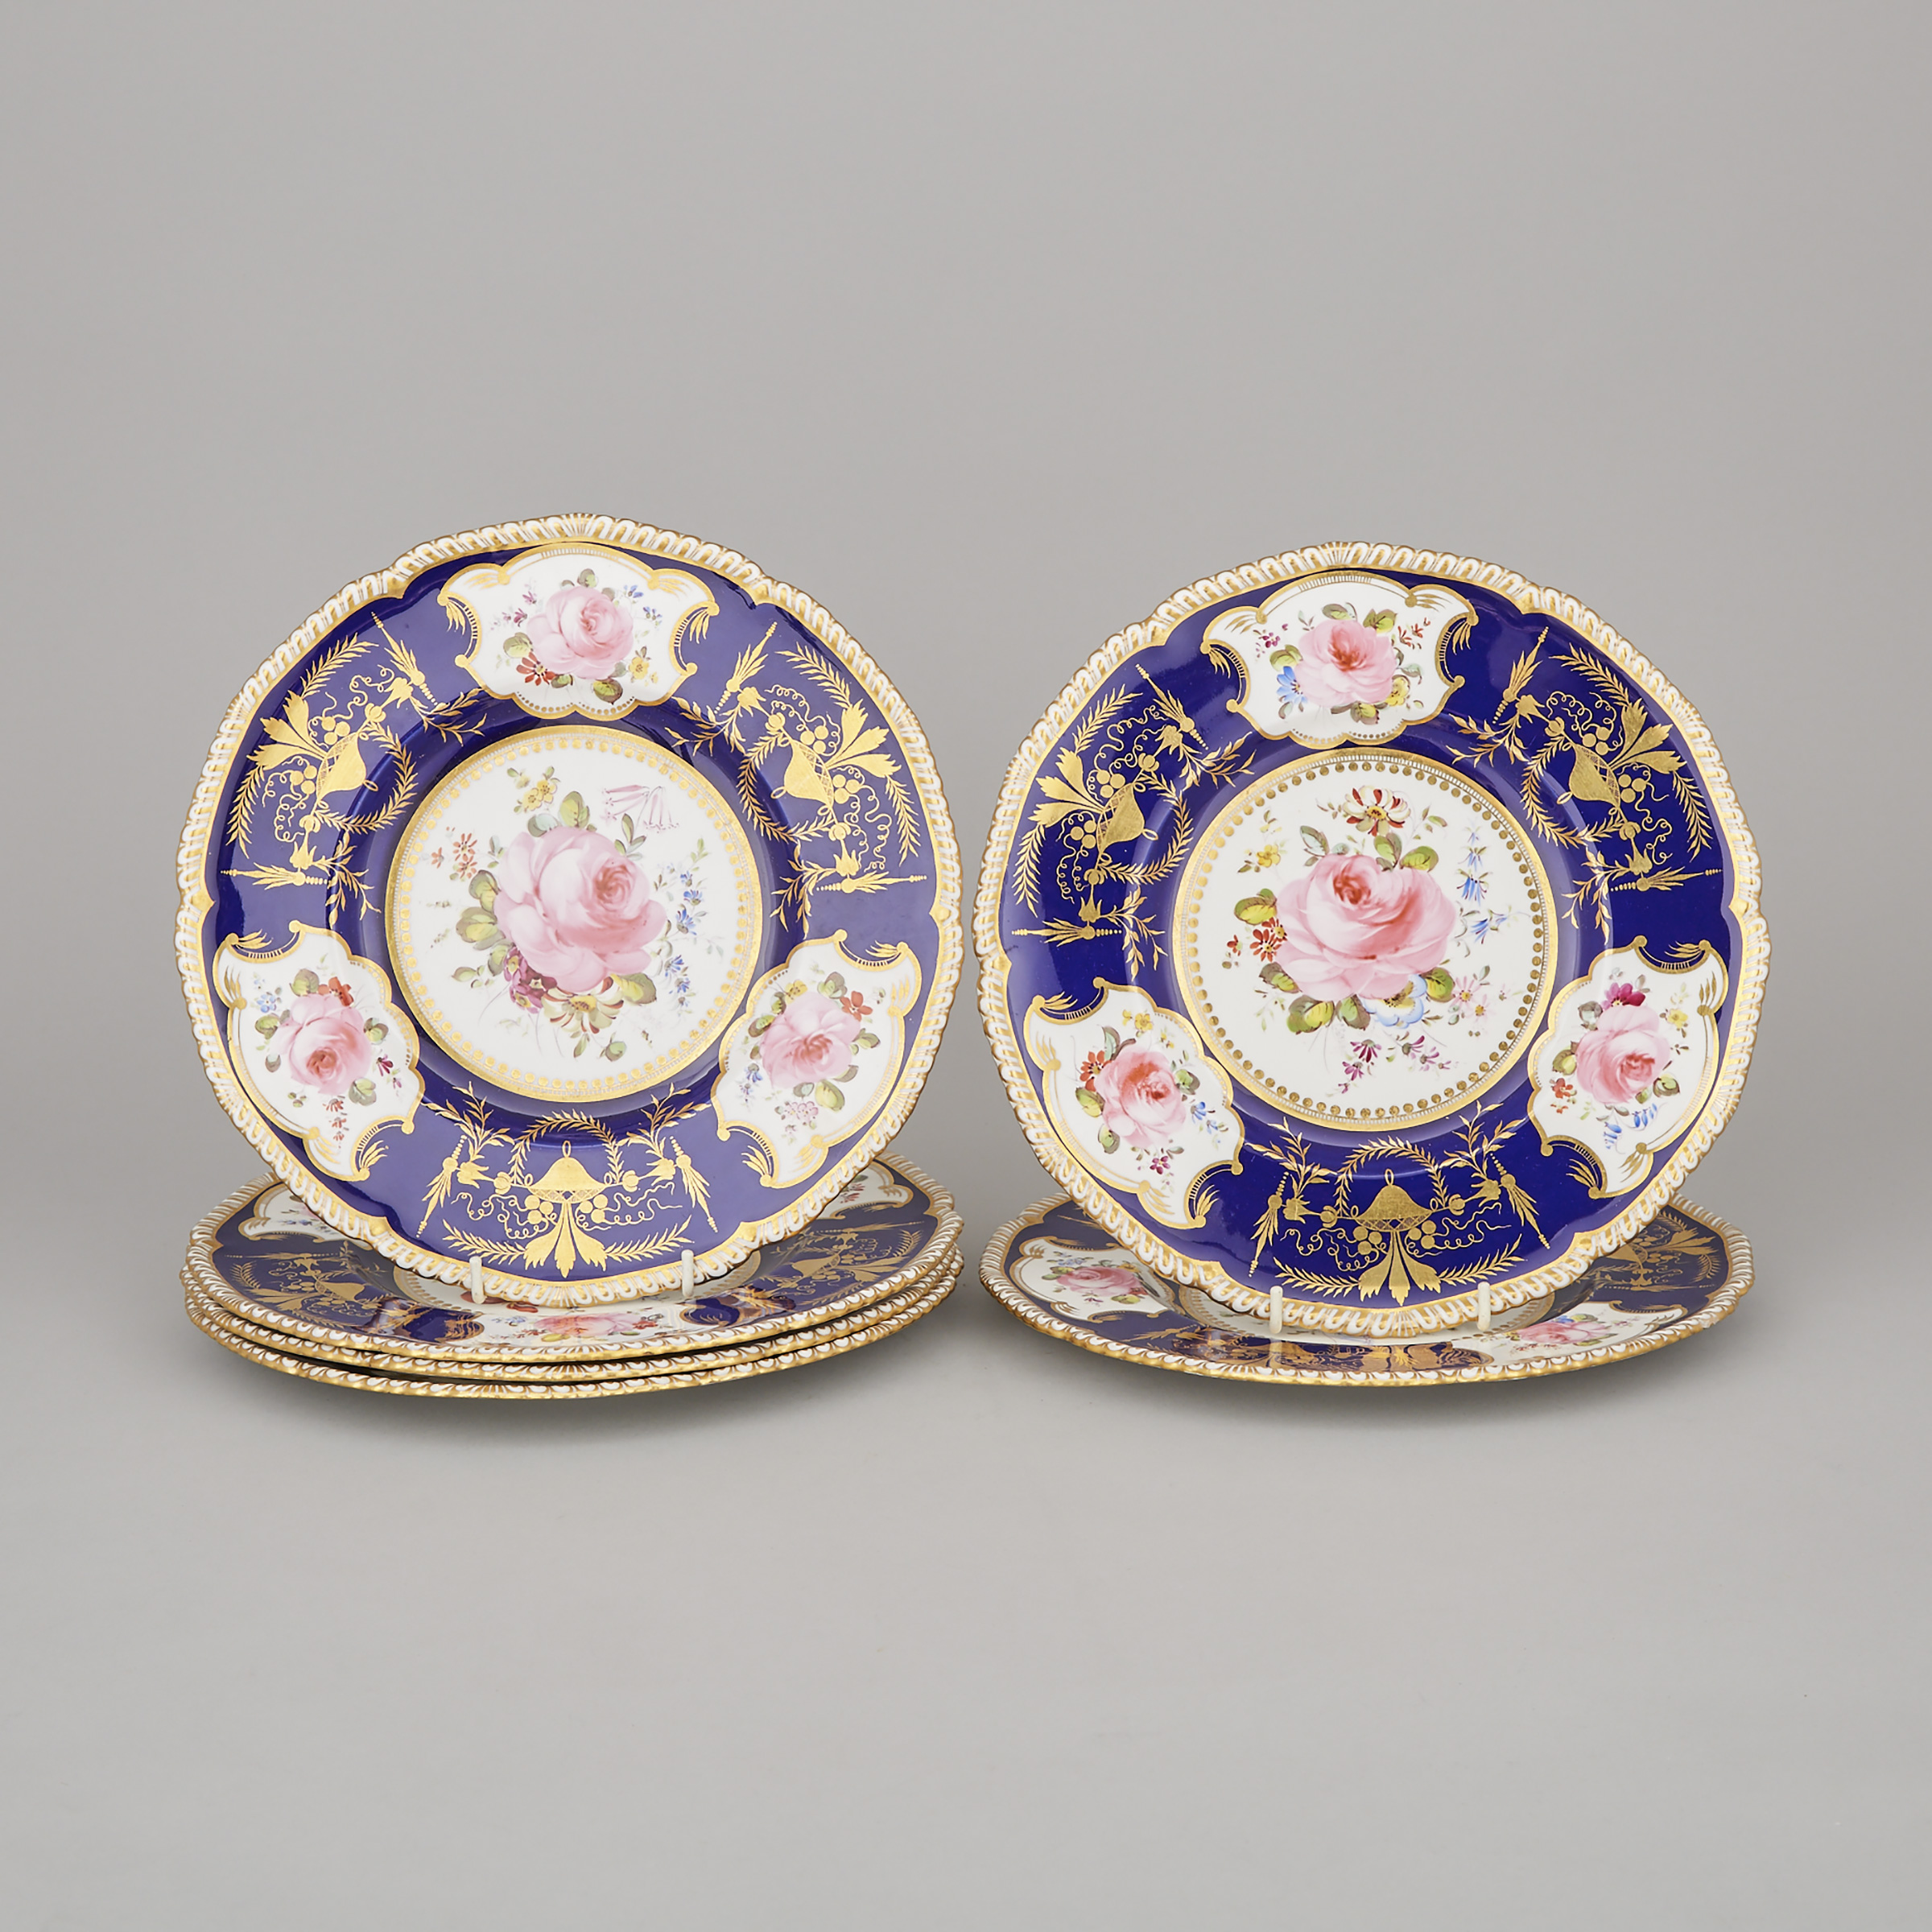 Six Royal Crown Derby Floral Paneled Blue Ground Service Plates, Cuthbert Gresley, 1932